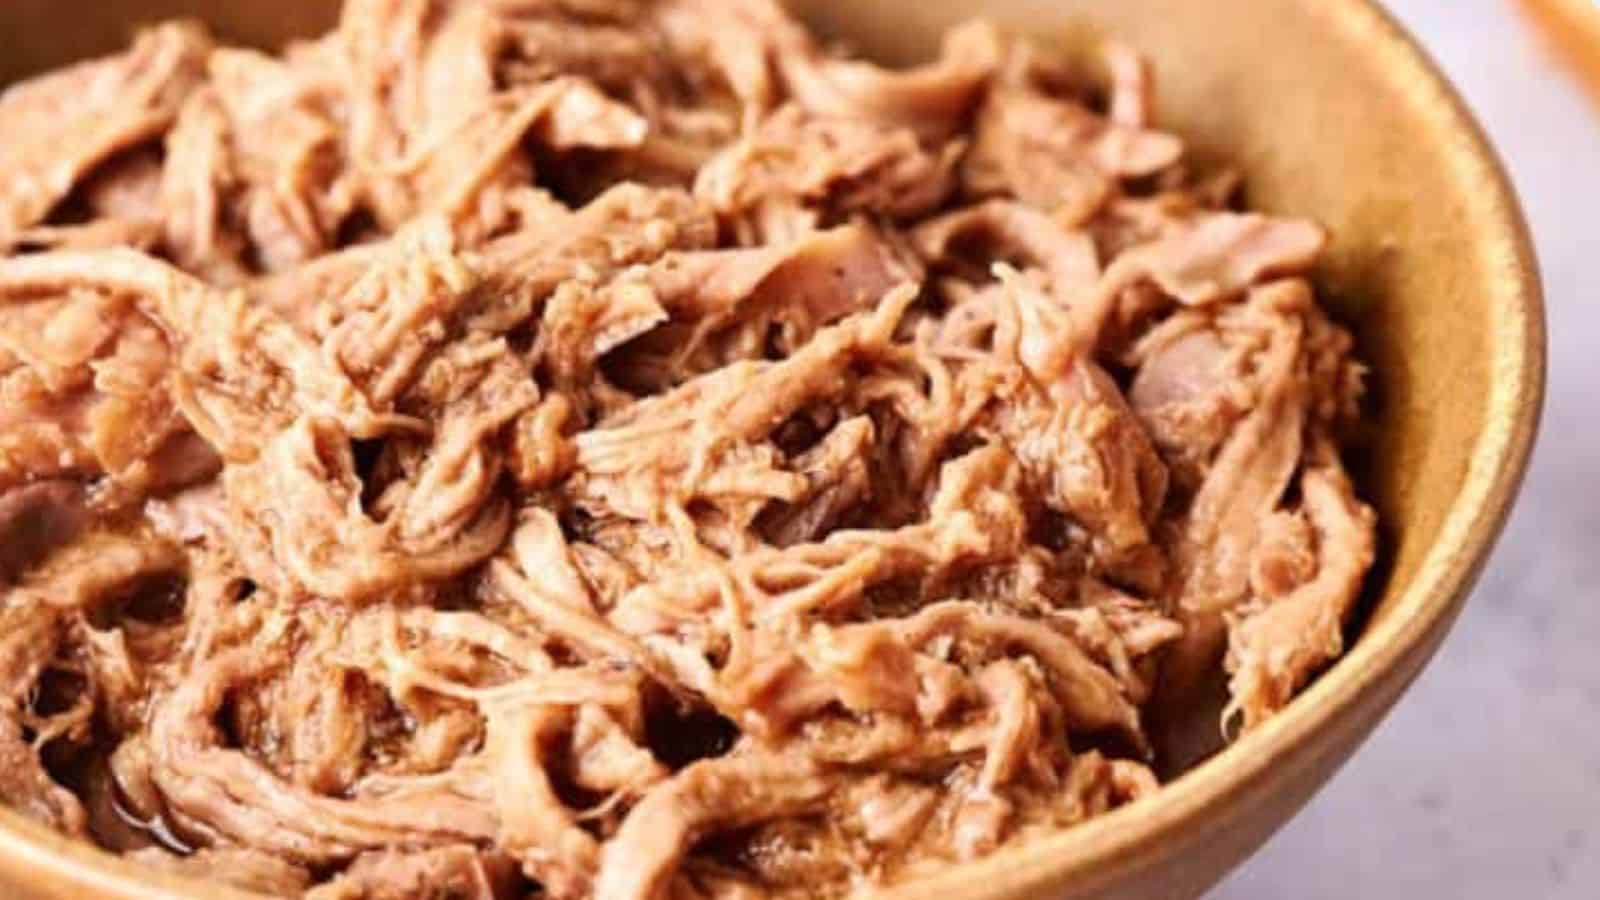 A bowl containing pulled pork.